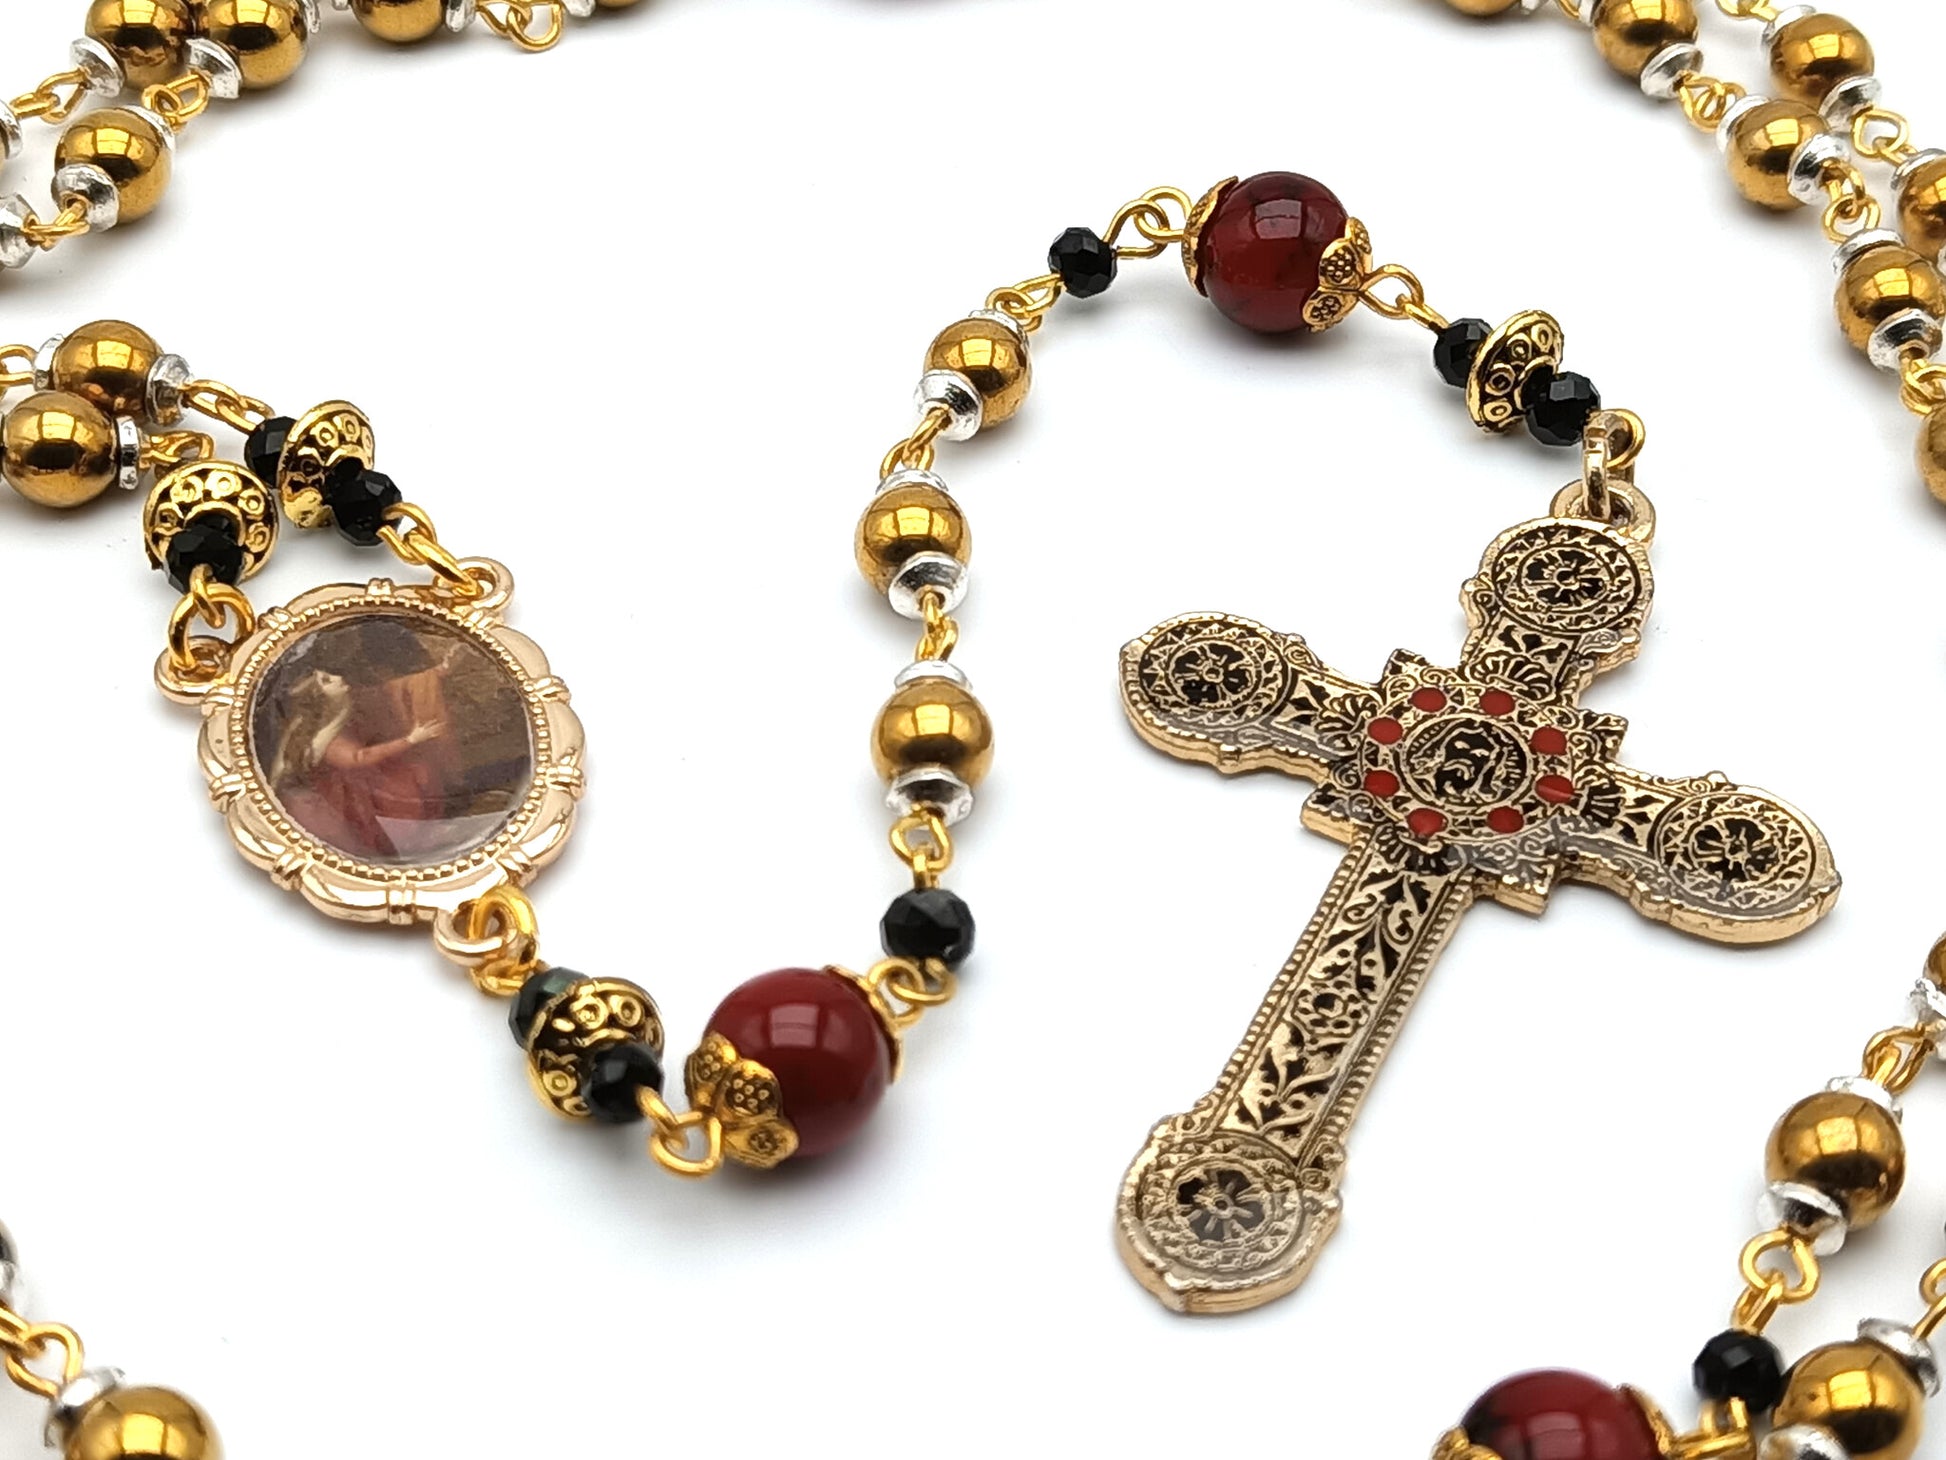 Saint Mary Magdalene unique rosary beads with gold hematite beads, red jasper pater beads, golden picture centre medal and decorative crucifix.